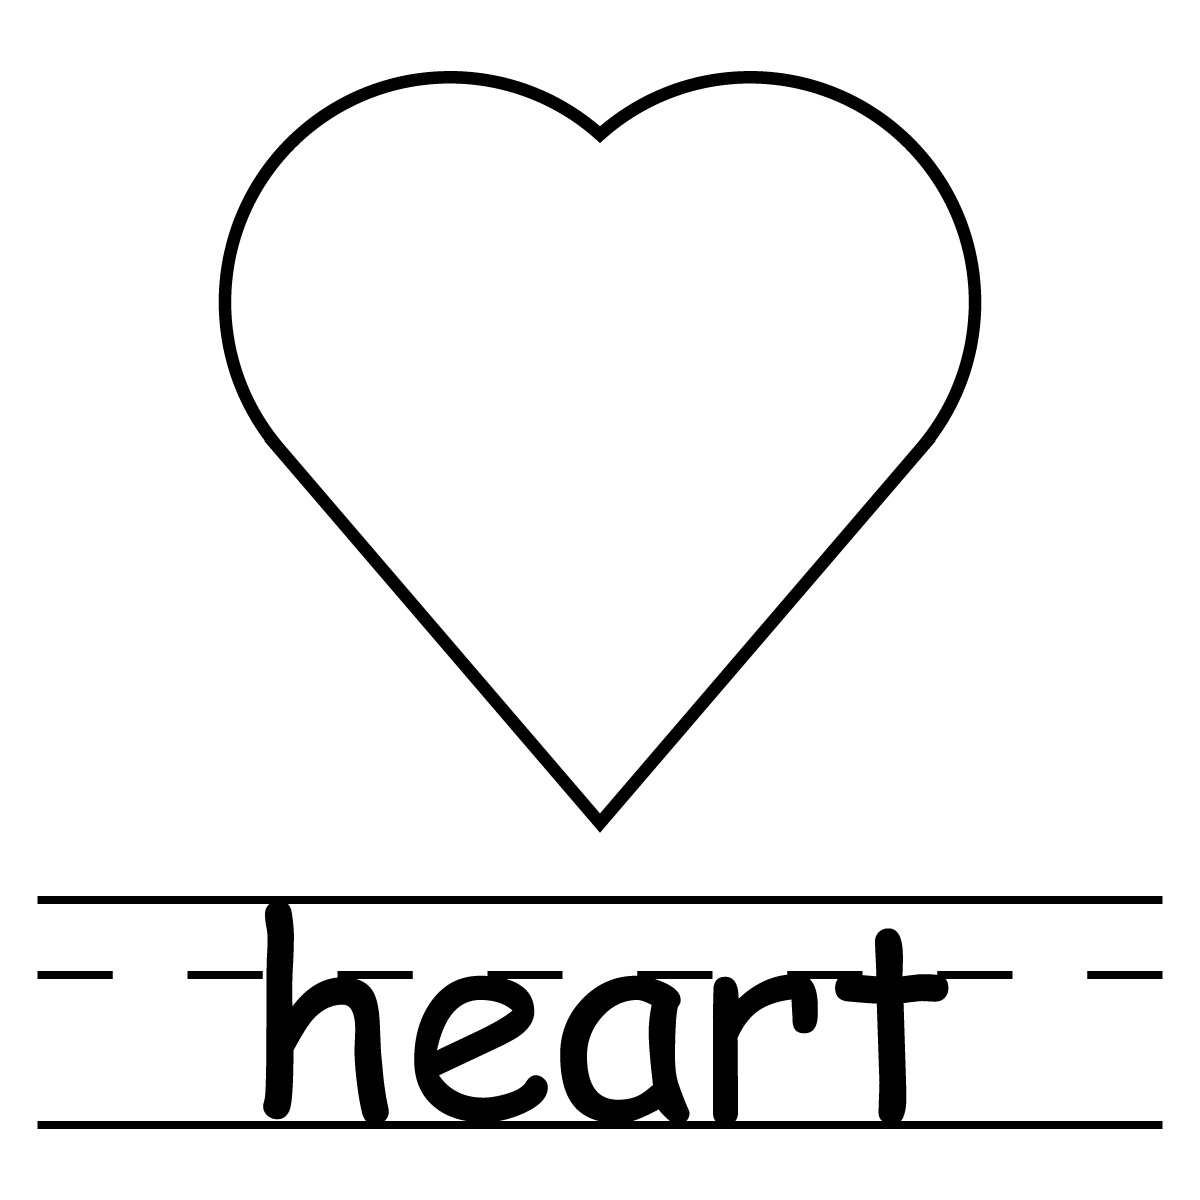 Clipart Heart Shape - Free Clipart Images